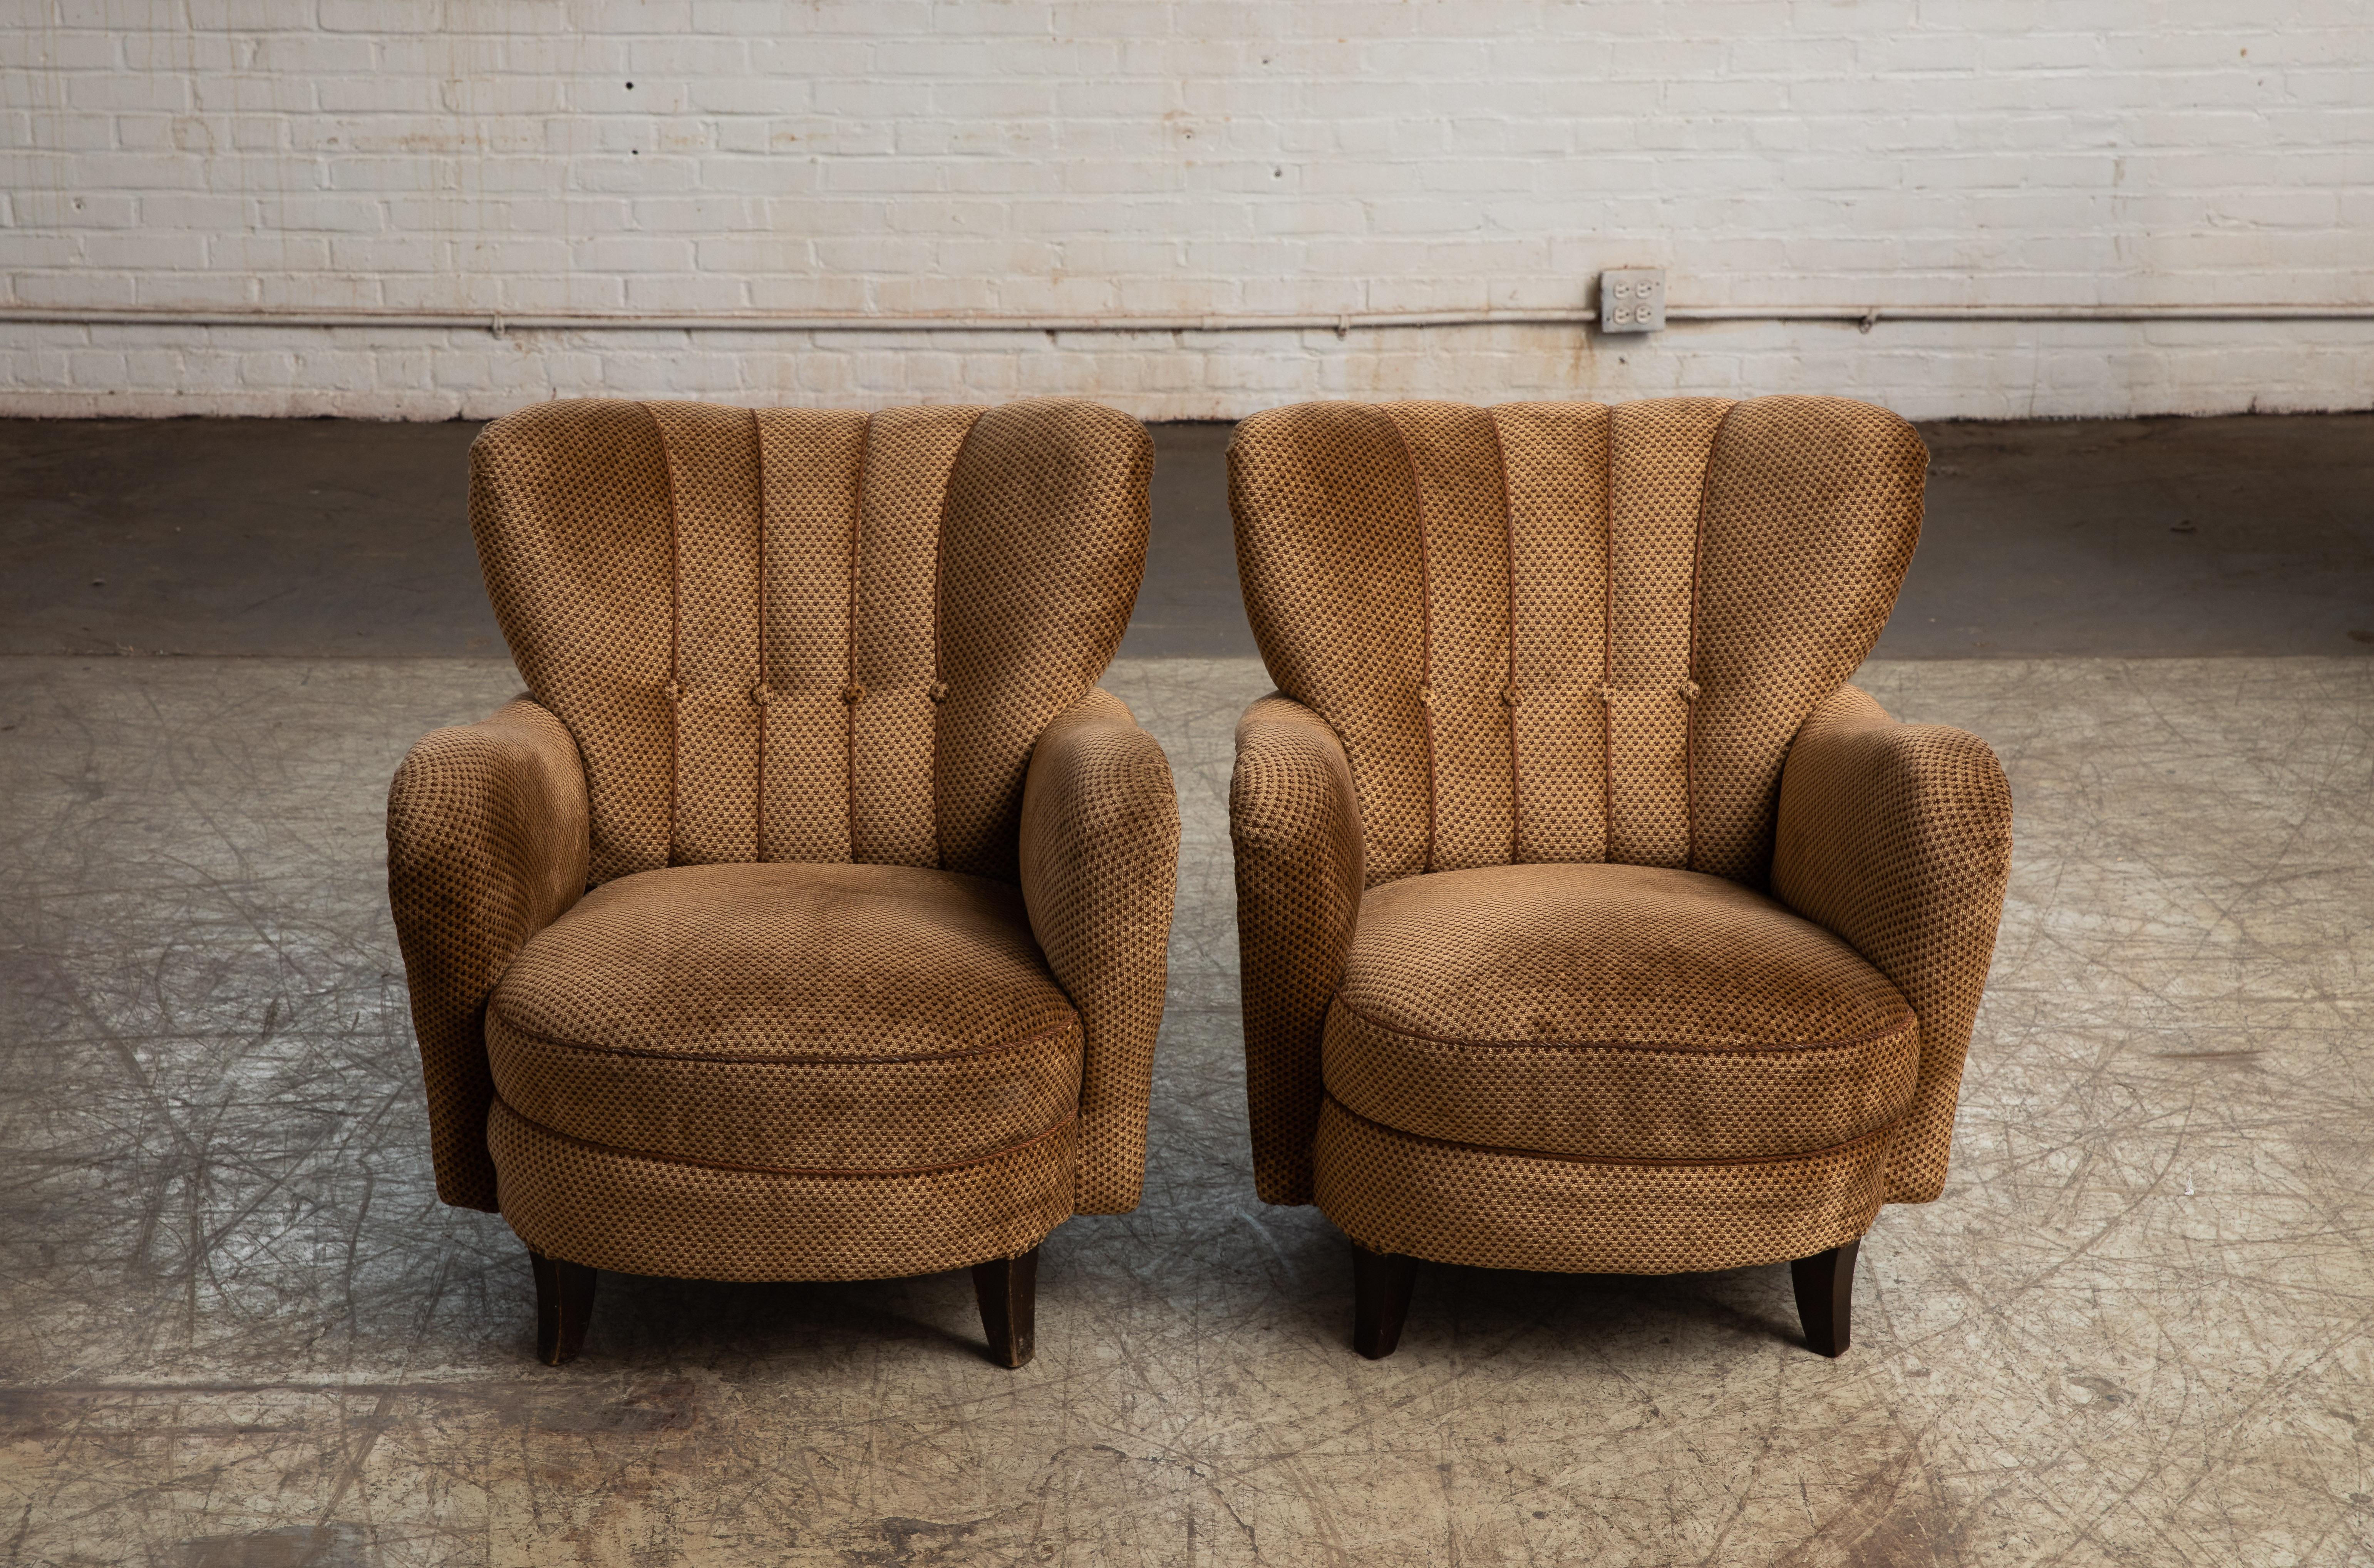 Super charming 1940s pair of lounge chairs in the style of Mogens Lassen with very sculptural organic shape and harmonious proportions. Versatile and very suitable for a smaller space in need of a stronger statement. Raised on stained beech legs and